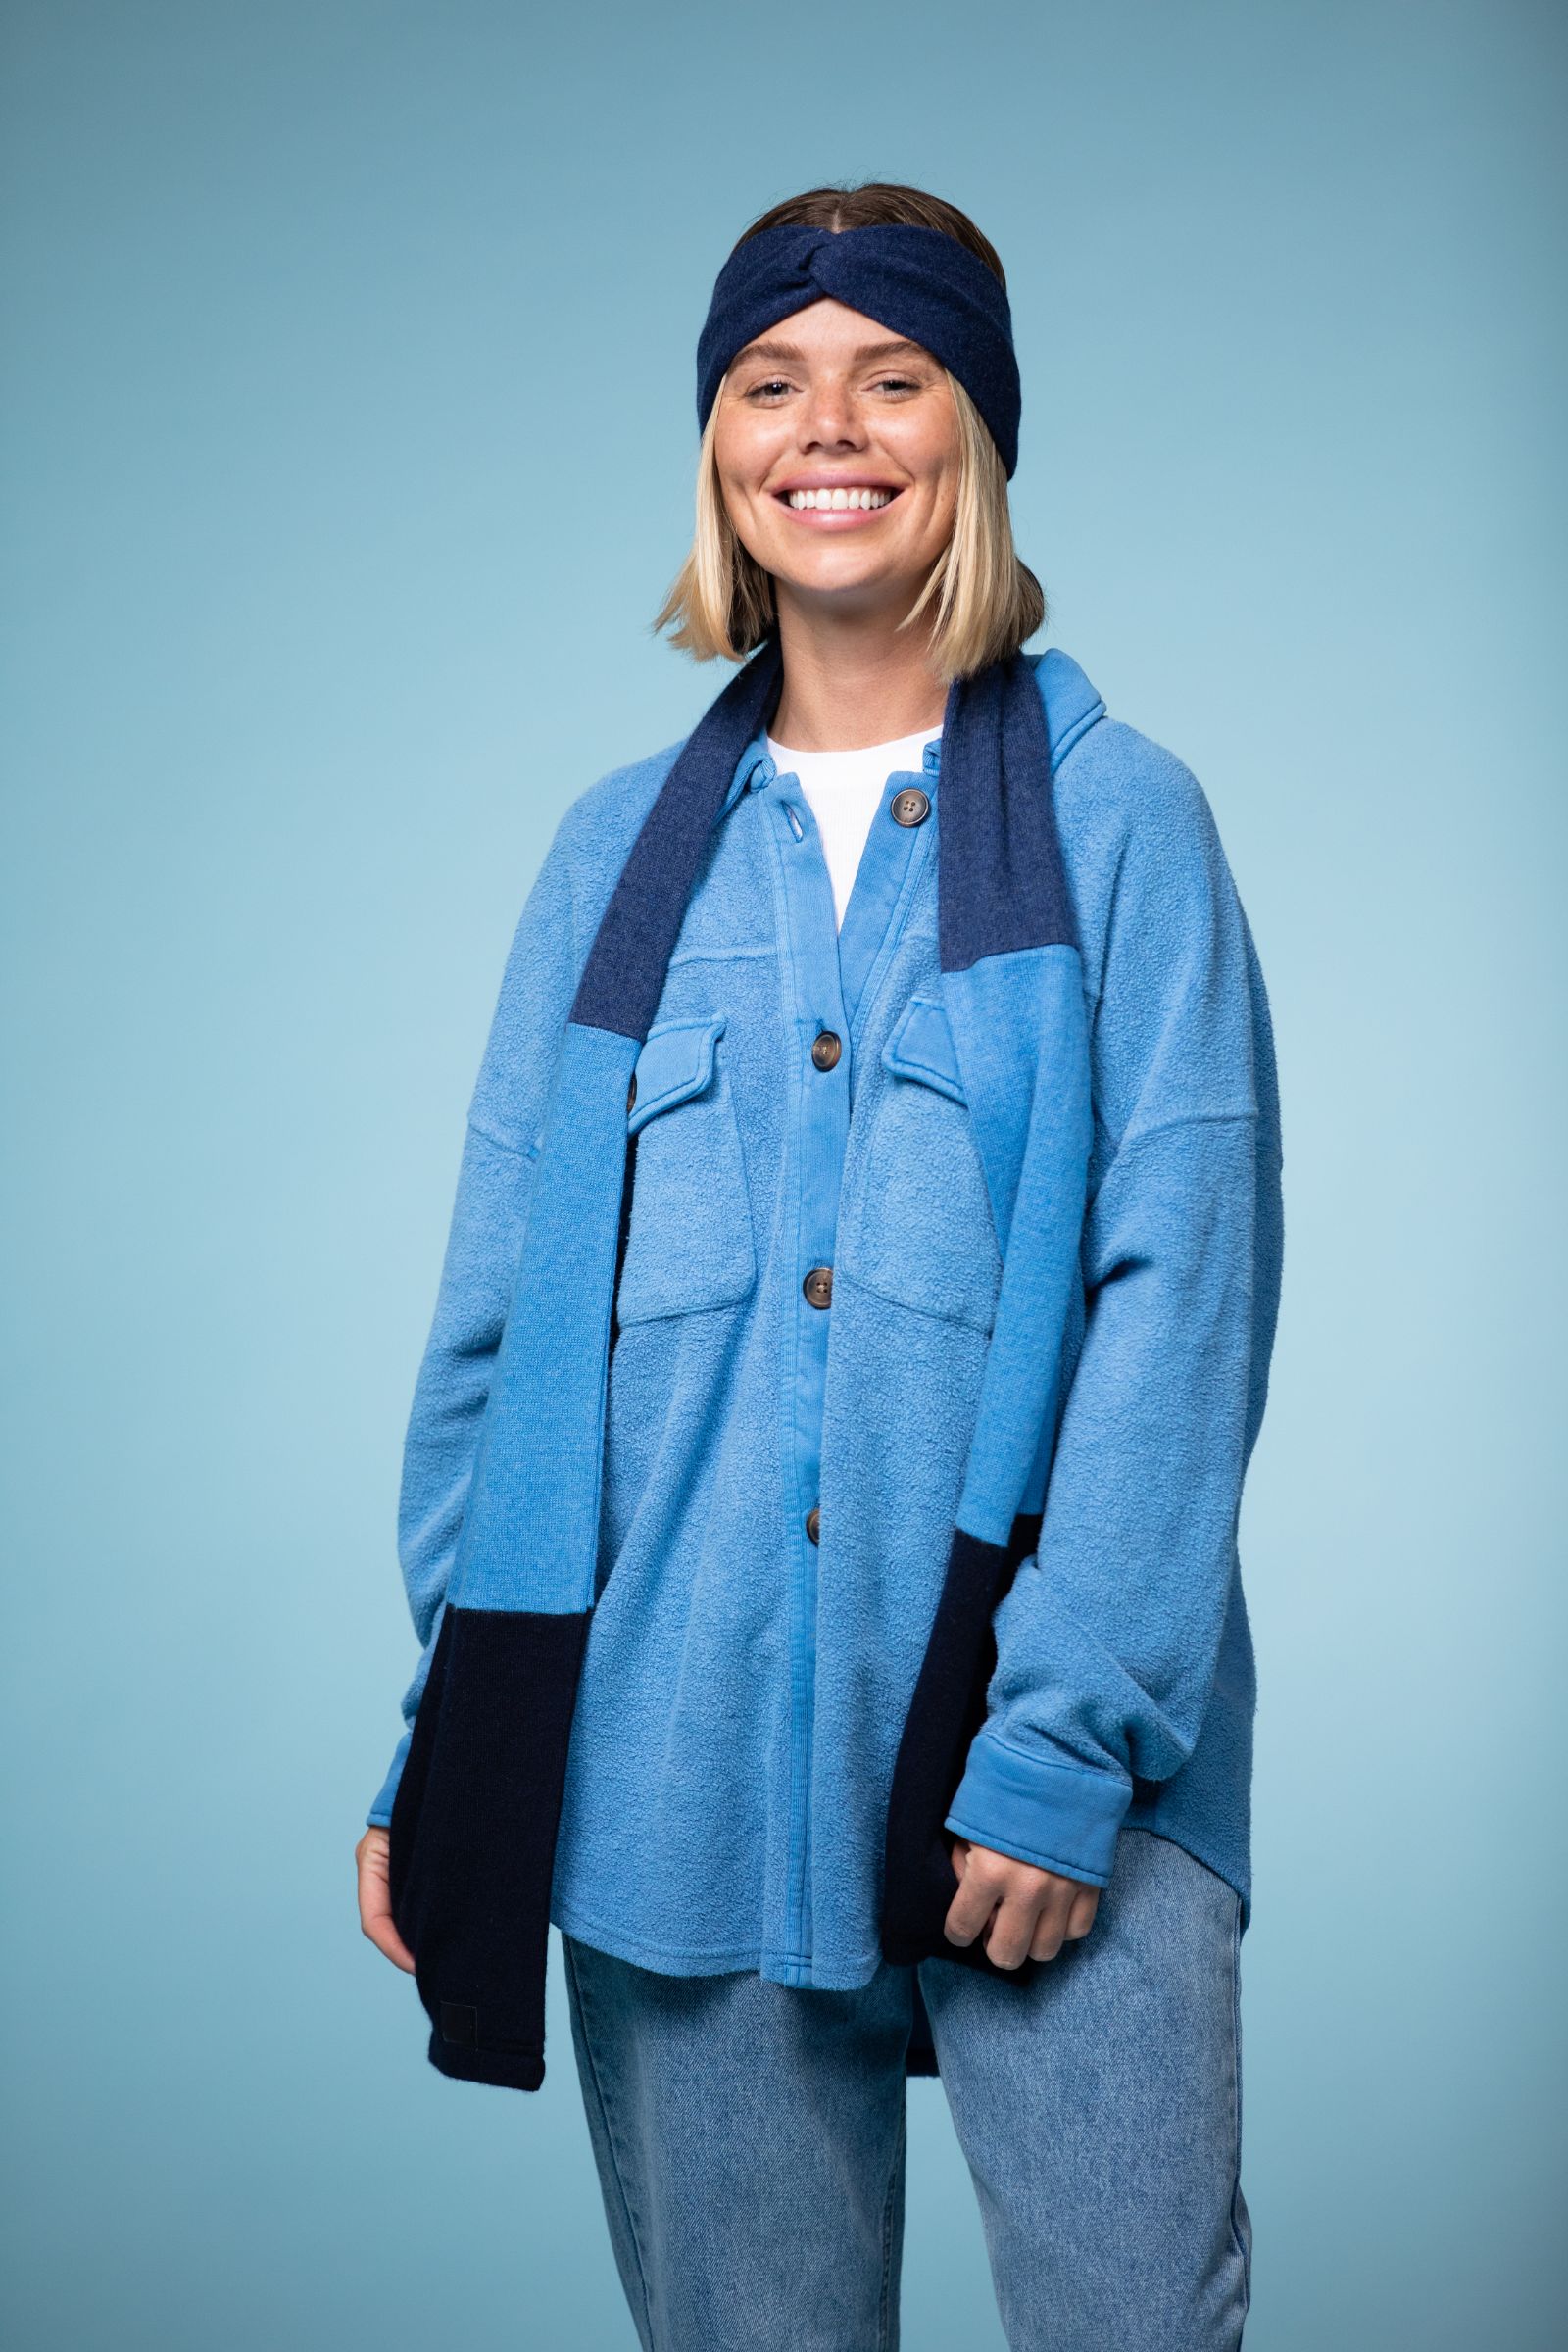 Female model wearing a dark blue headband, dark blue and blue scarf, light blue sweater and white top as well as jeans smiling and posing for the camera against a light blue backdrop